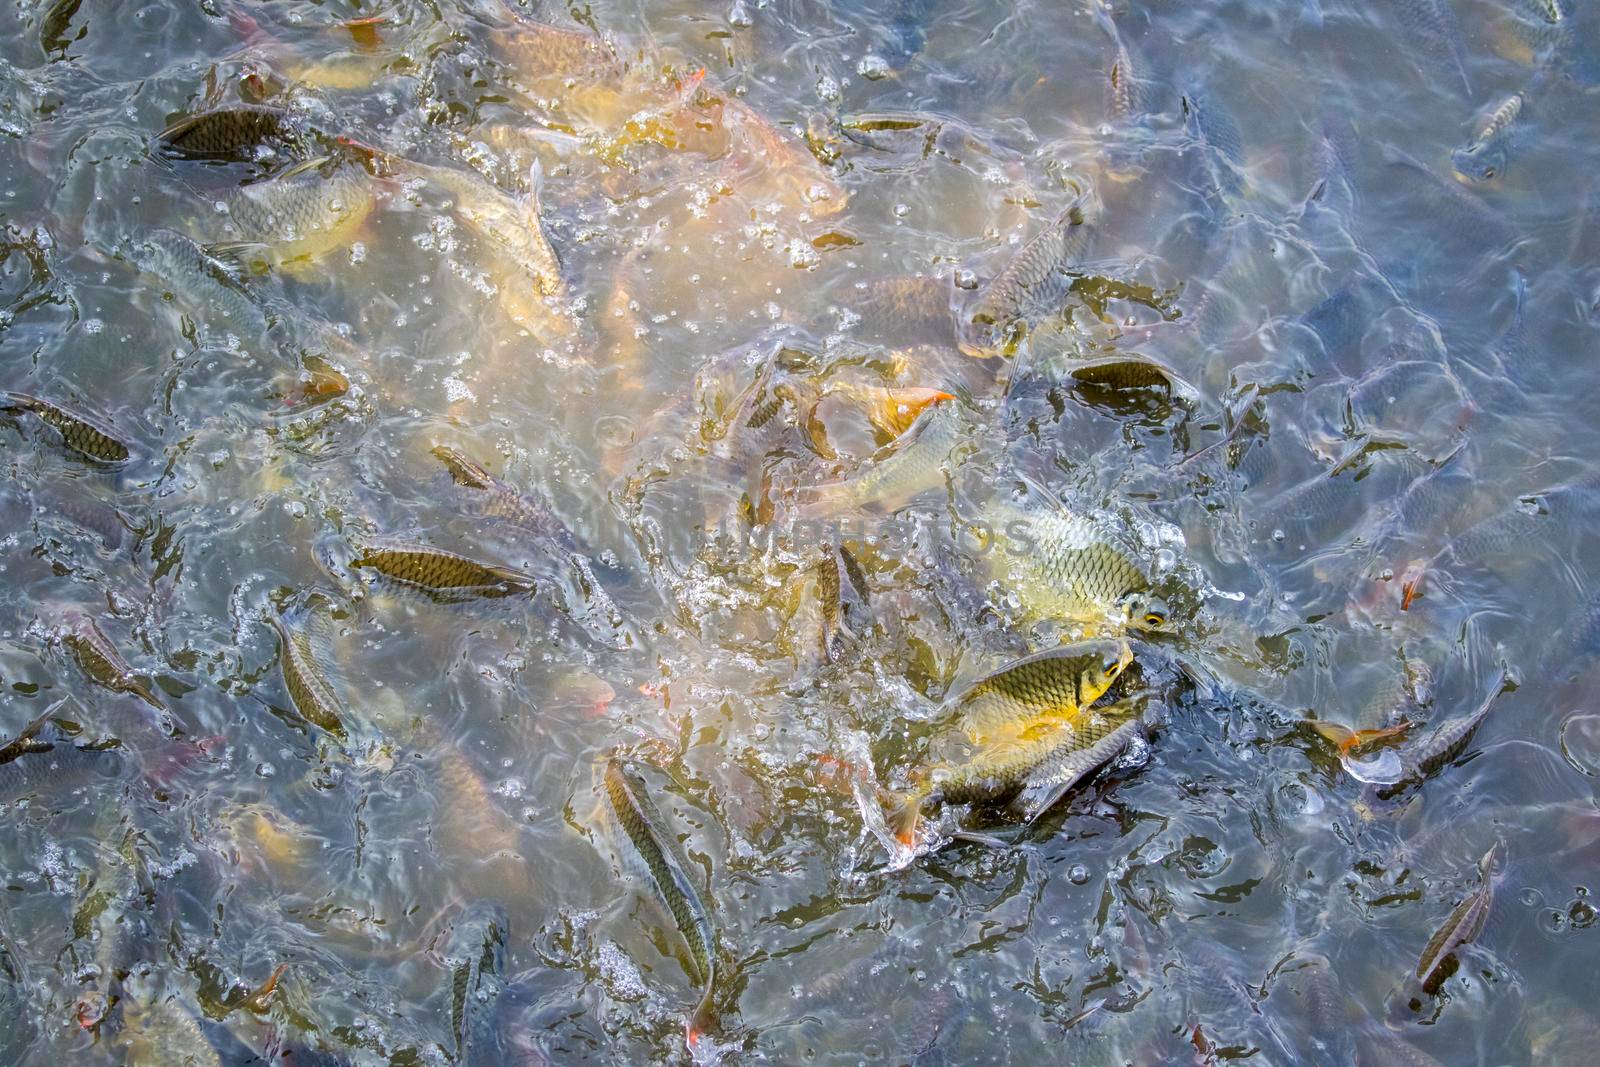 Image of a fish herd in the water(Java barb, Silver barb). Aquatic animals by yod67